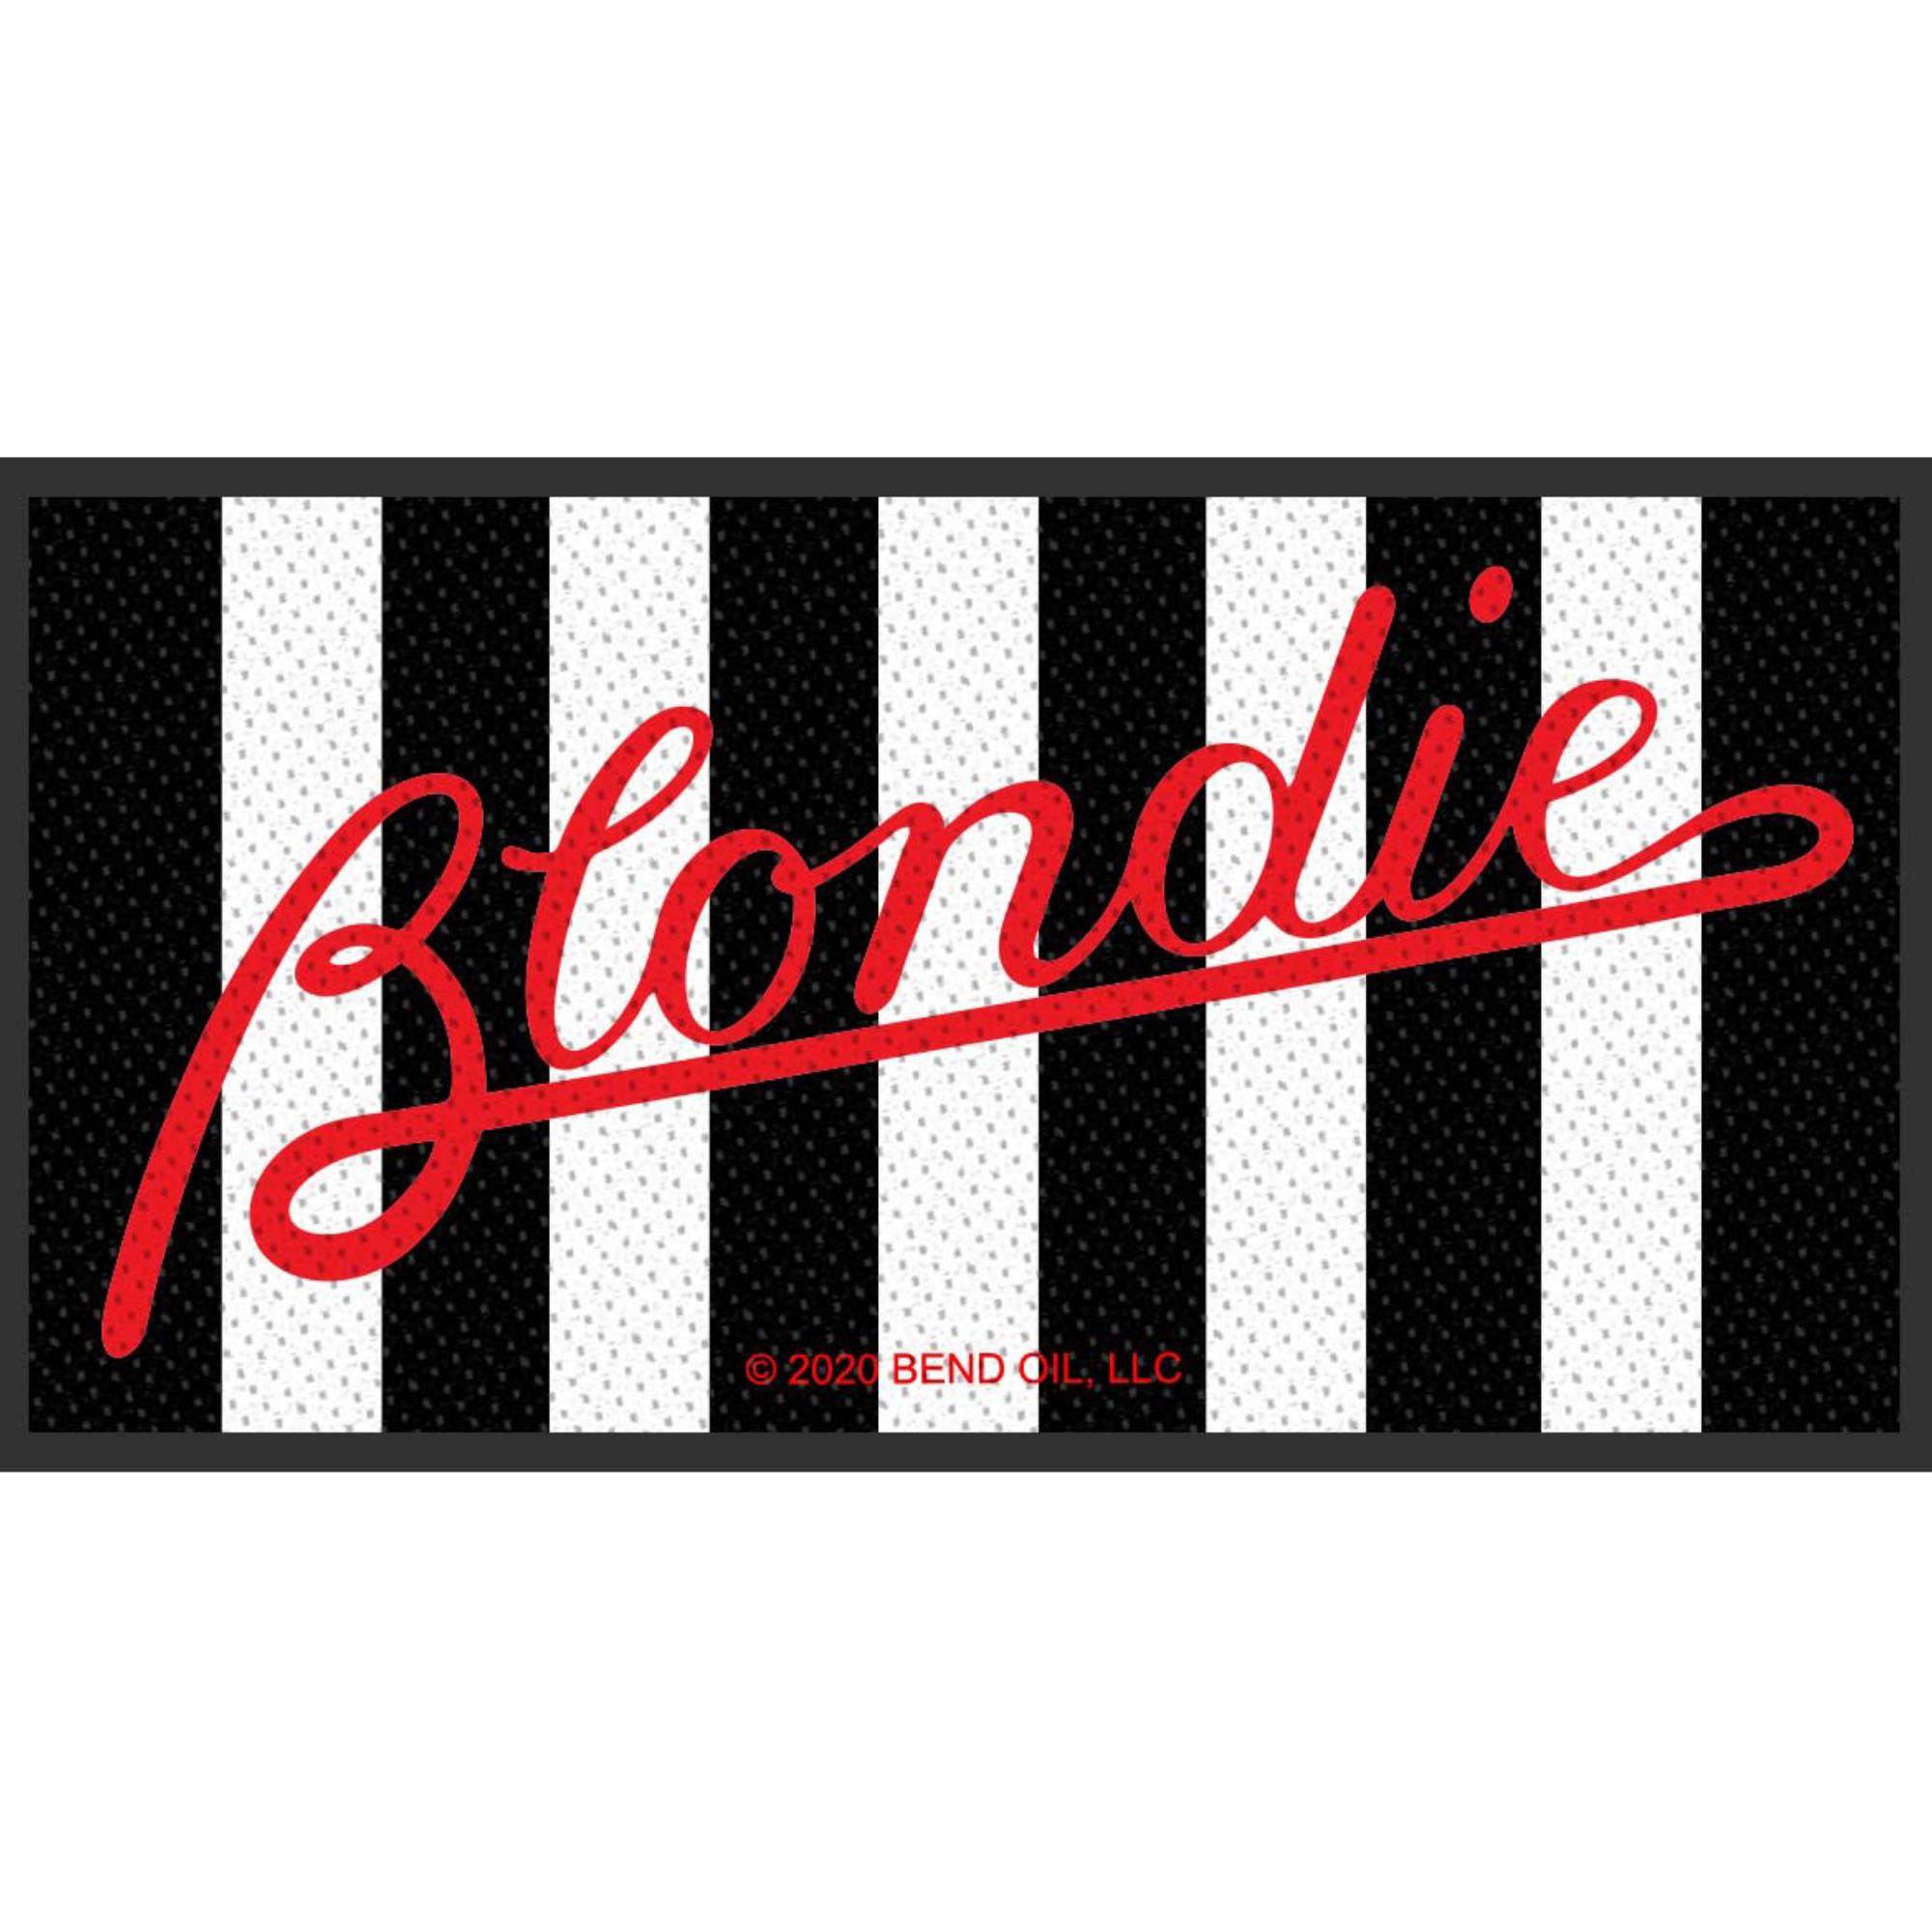 Parallel Lines Patch